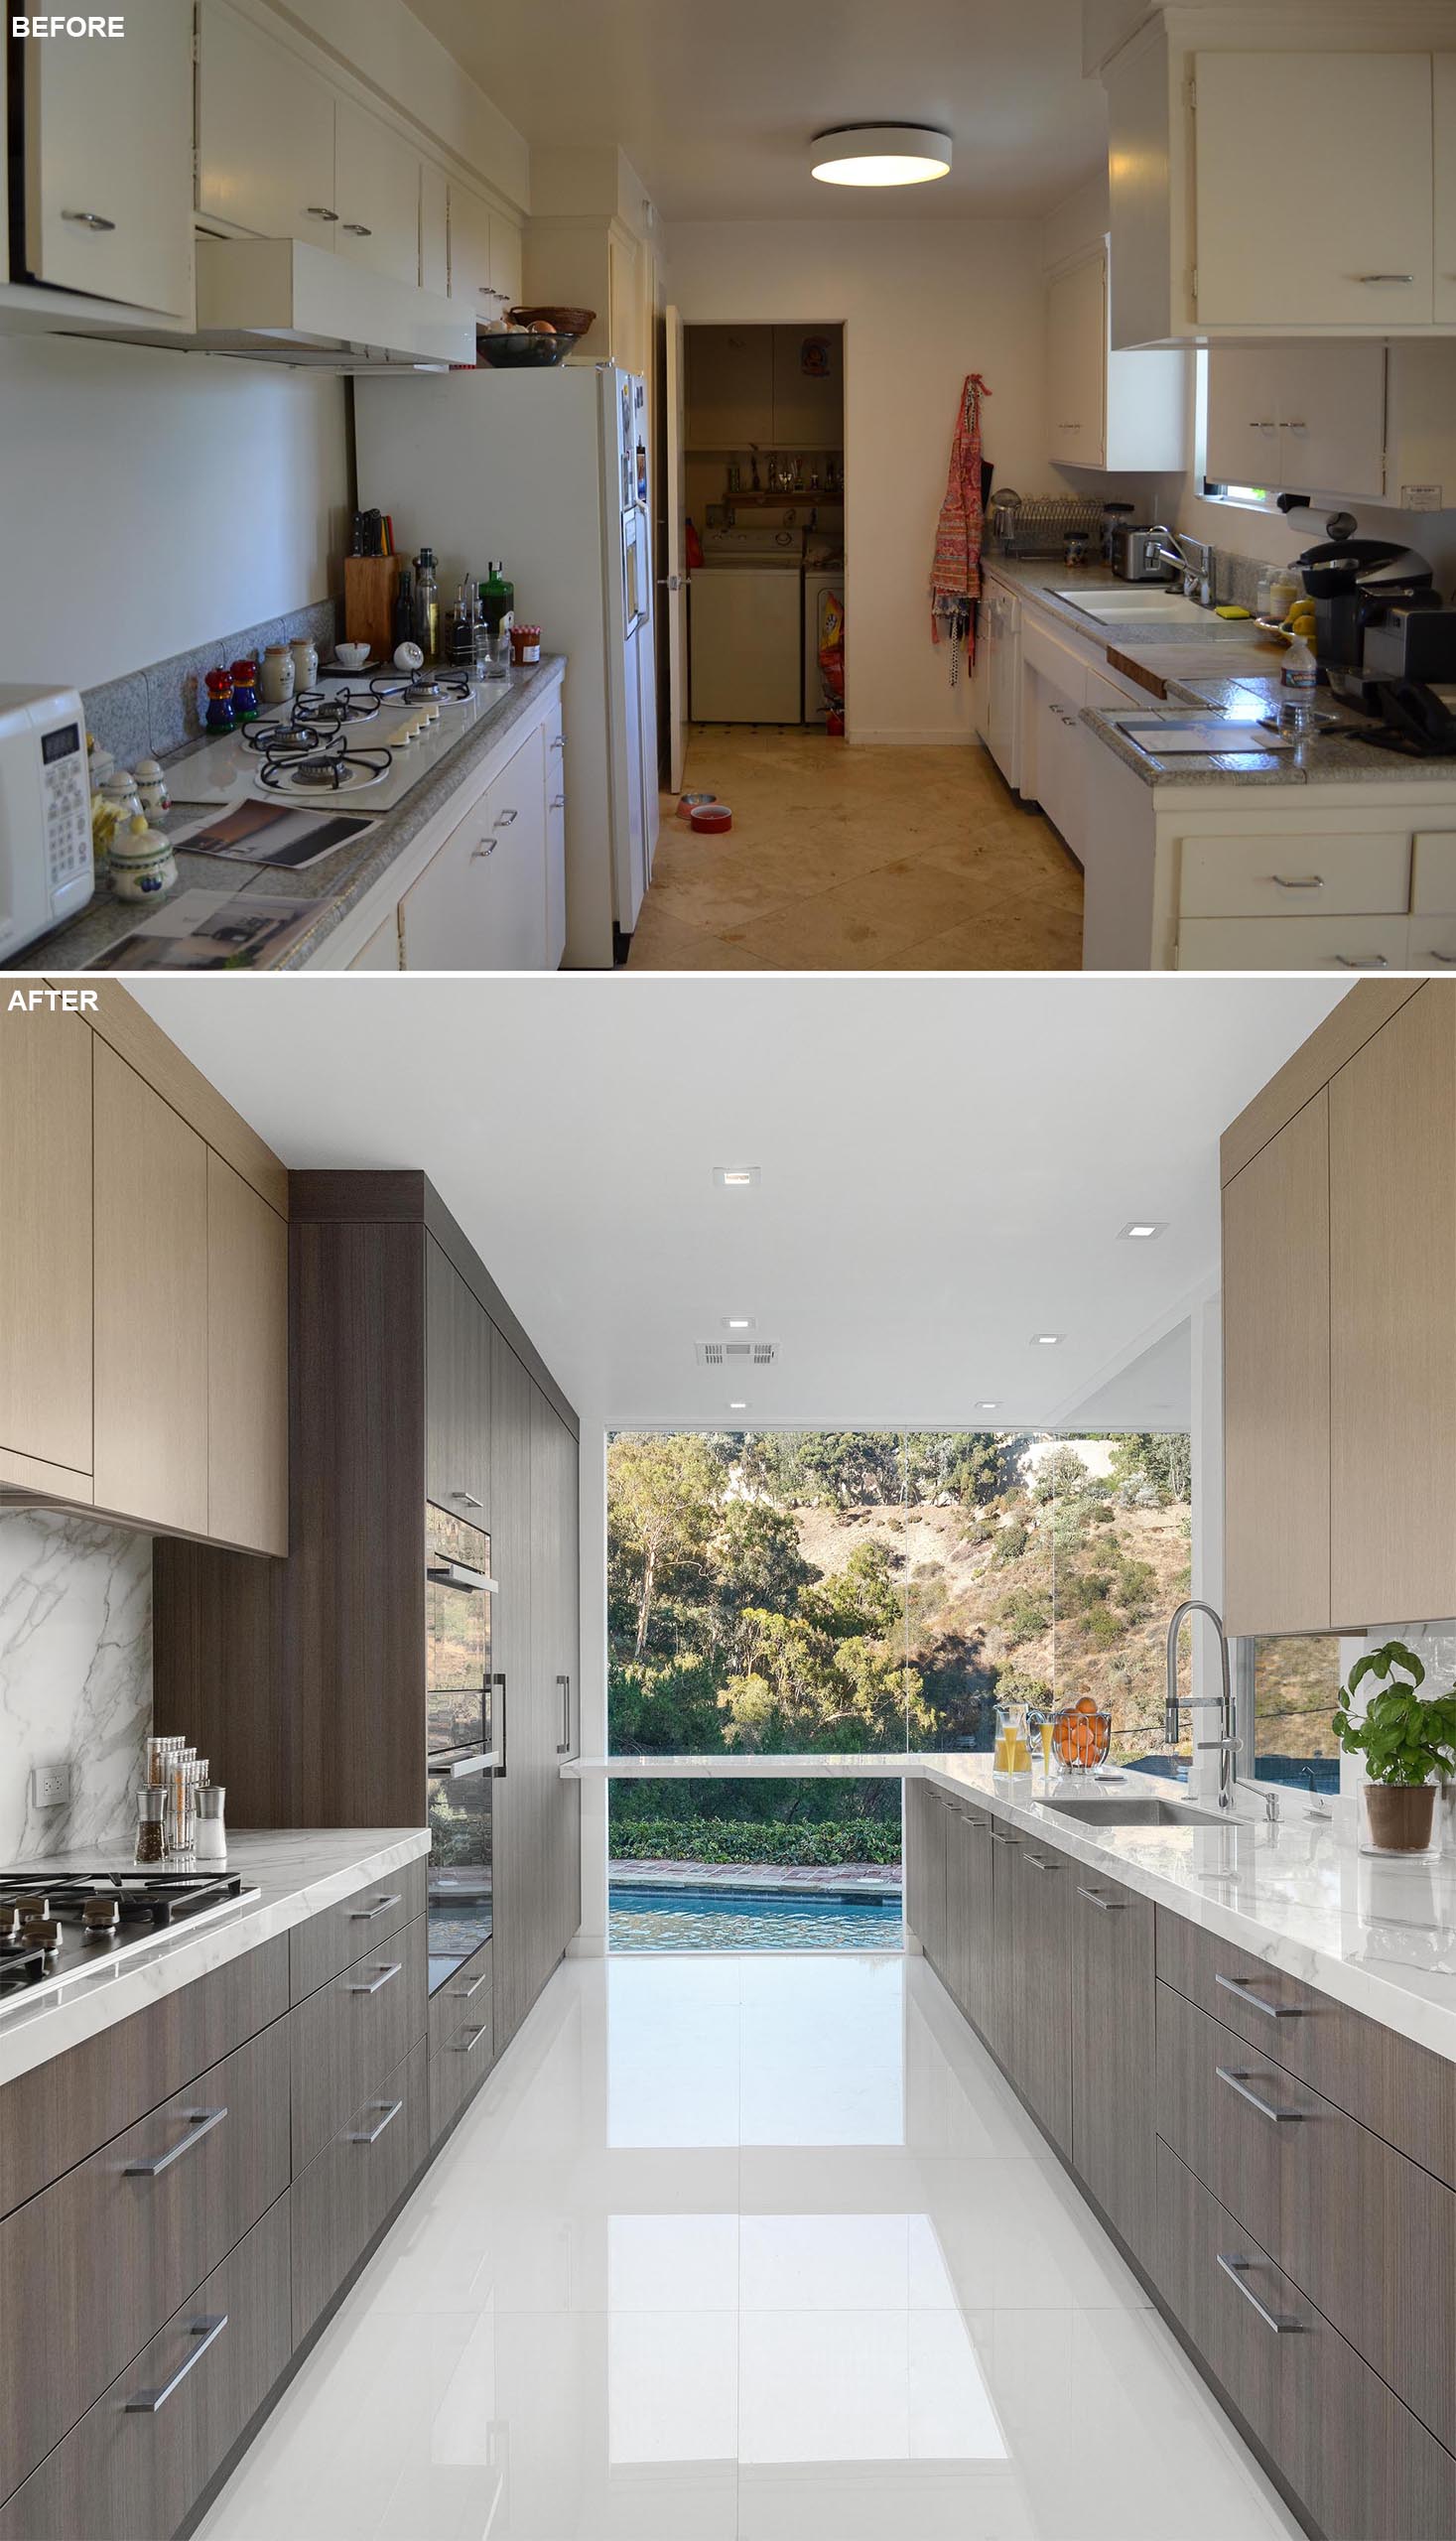 This modern kitchen remodel included removing the far wall, which was once the laundry room, and adding floor-to-ceiling windows that provide natural light and views of the landscape and pool.